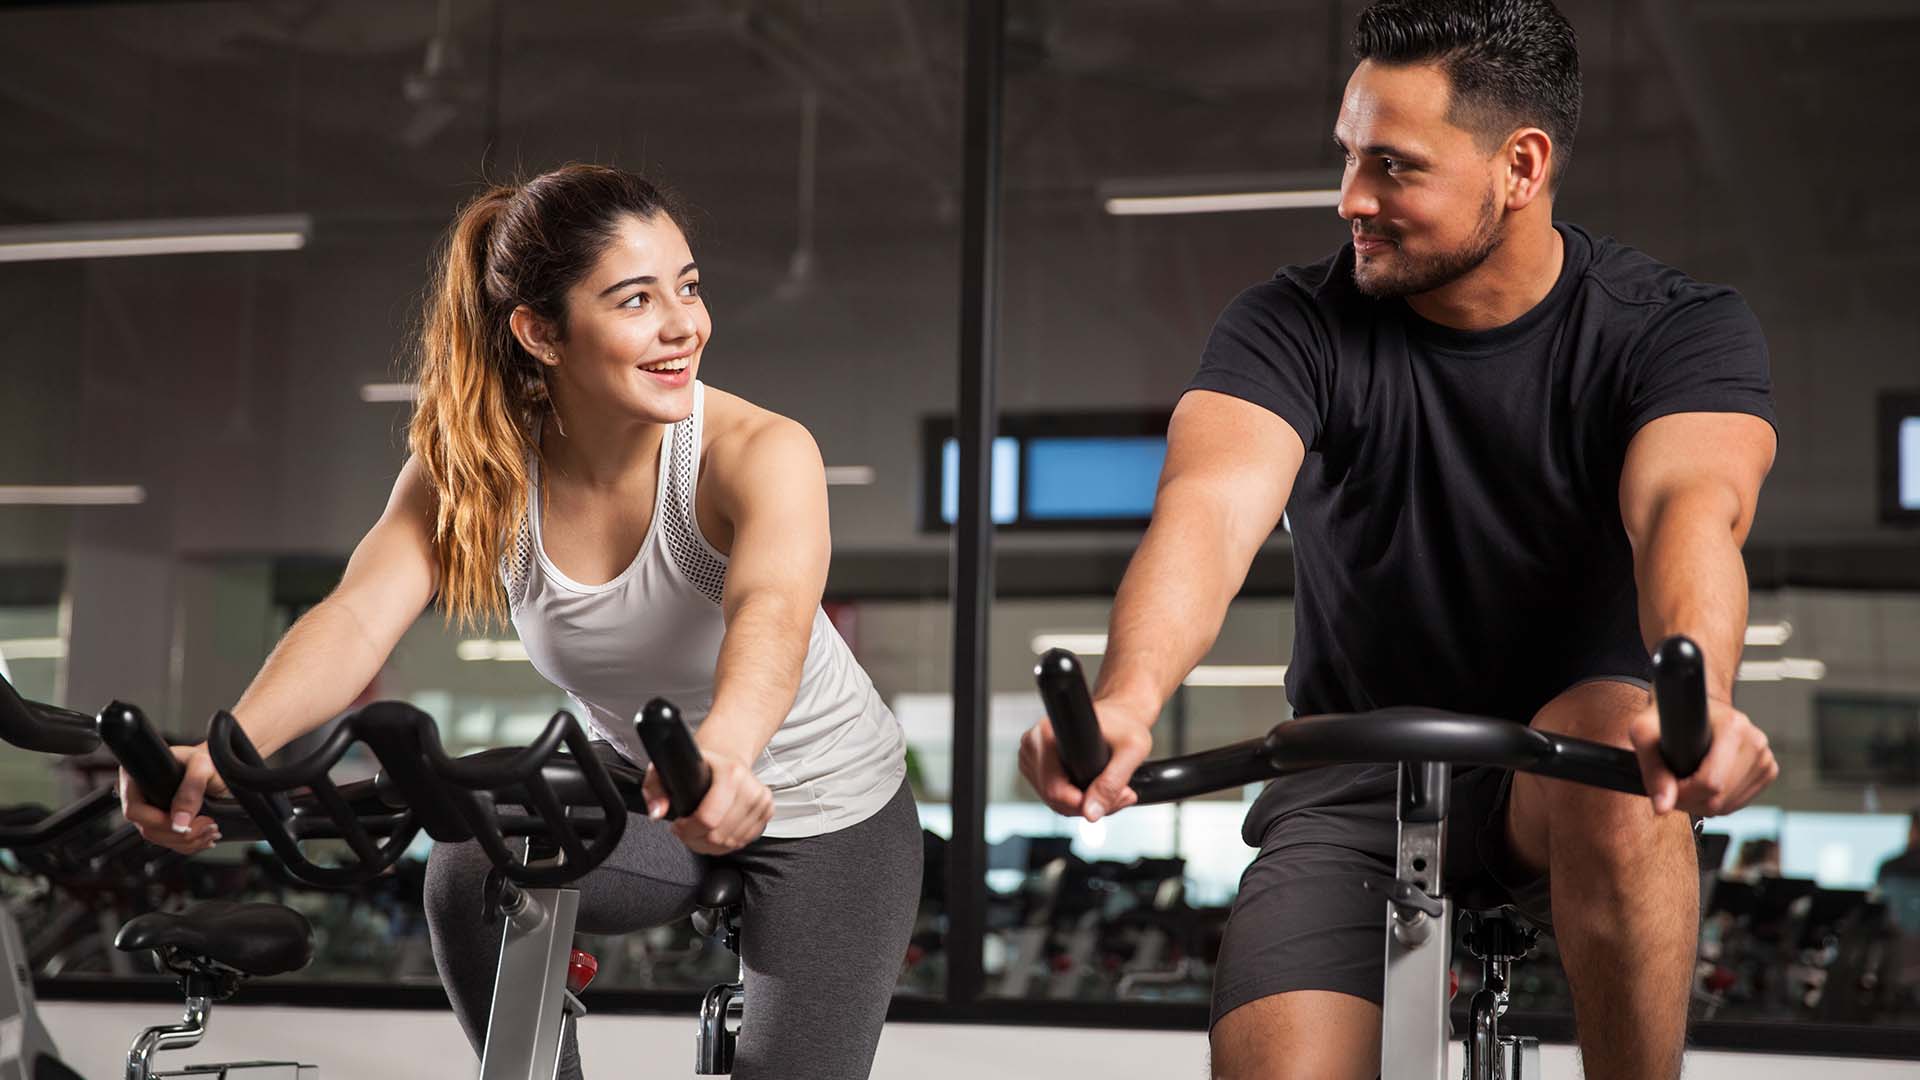 Brunette man and woman conversing while smiling at each other at the gym. They are both on the spin bikes.